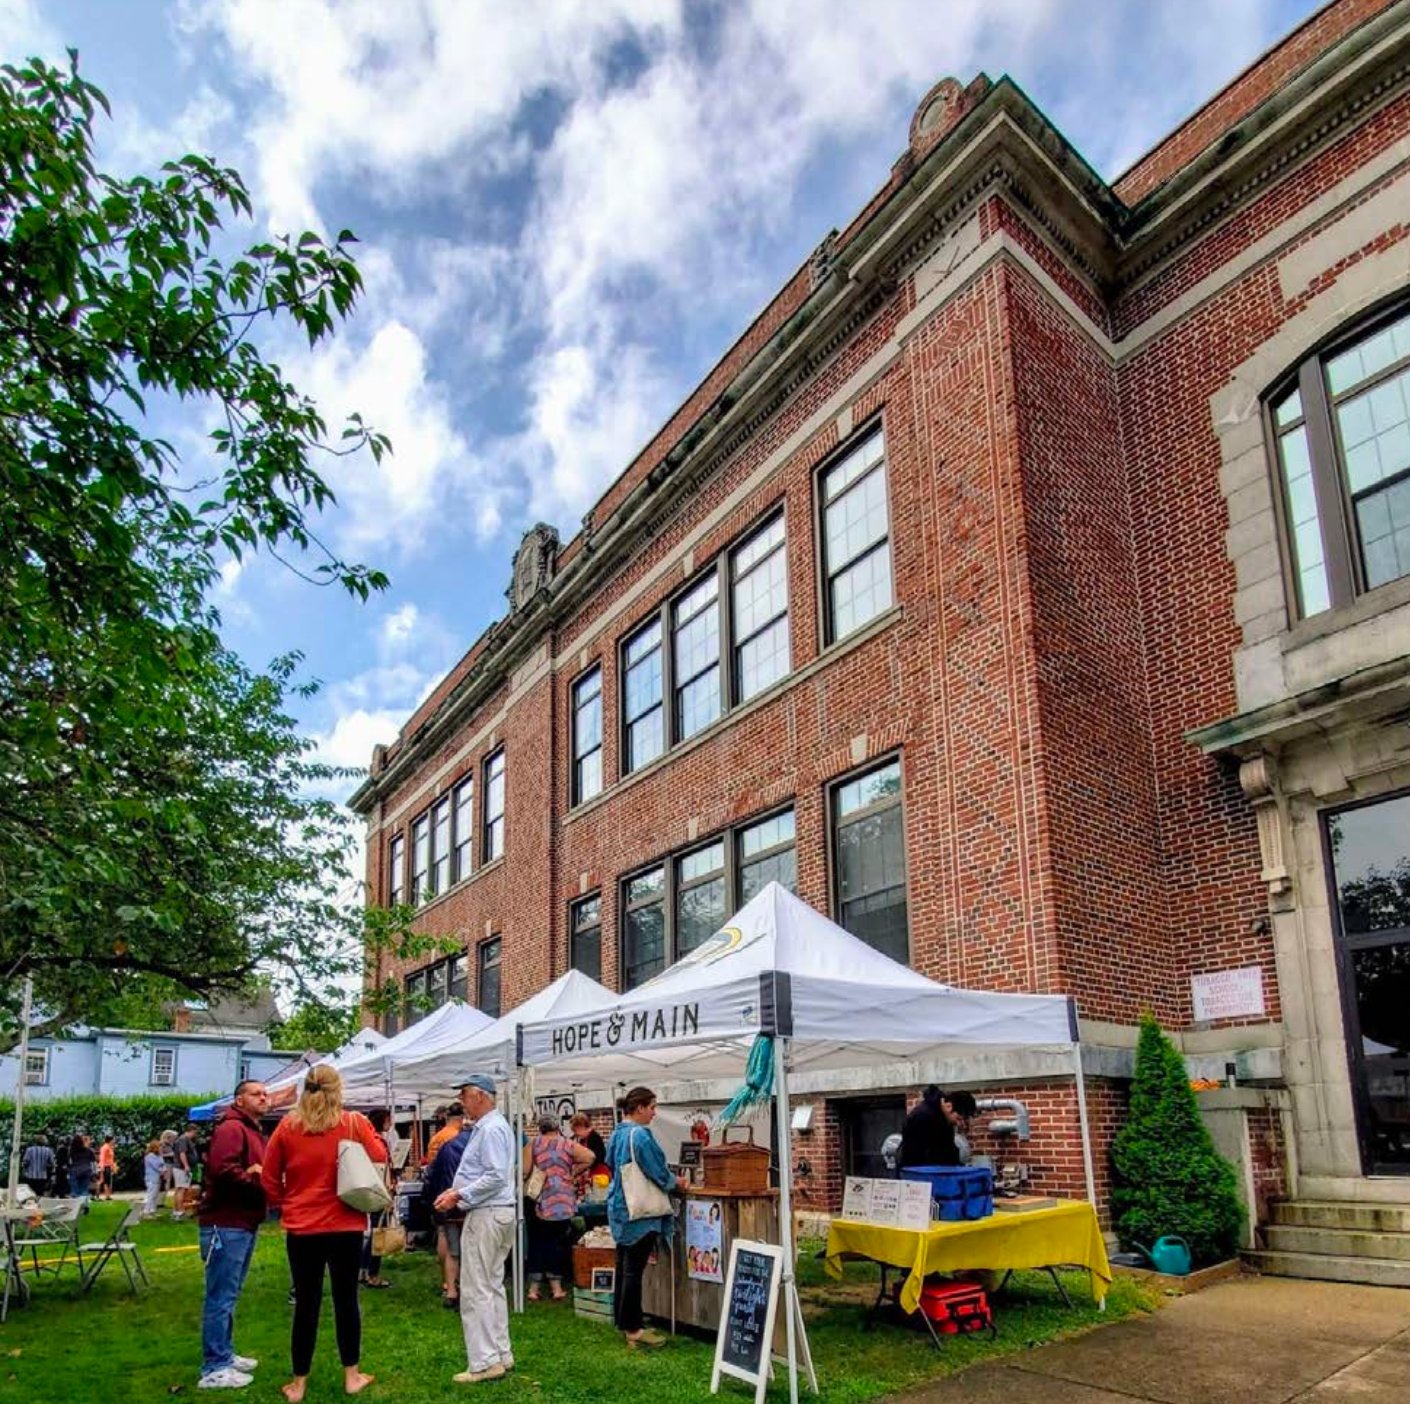 The Schoolyard Market at Hope & Main will feature food, cocktails, and plenty more each Wednesday evening from June 15 through Sept. 28